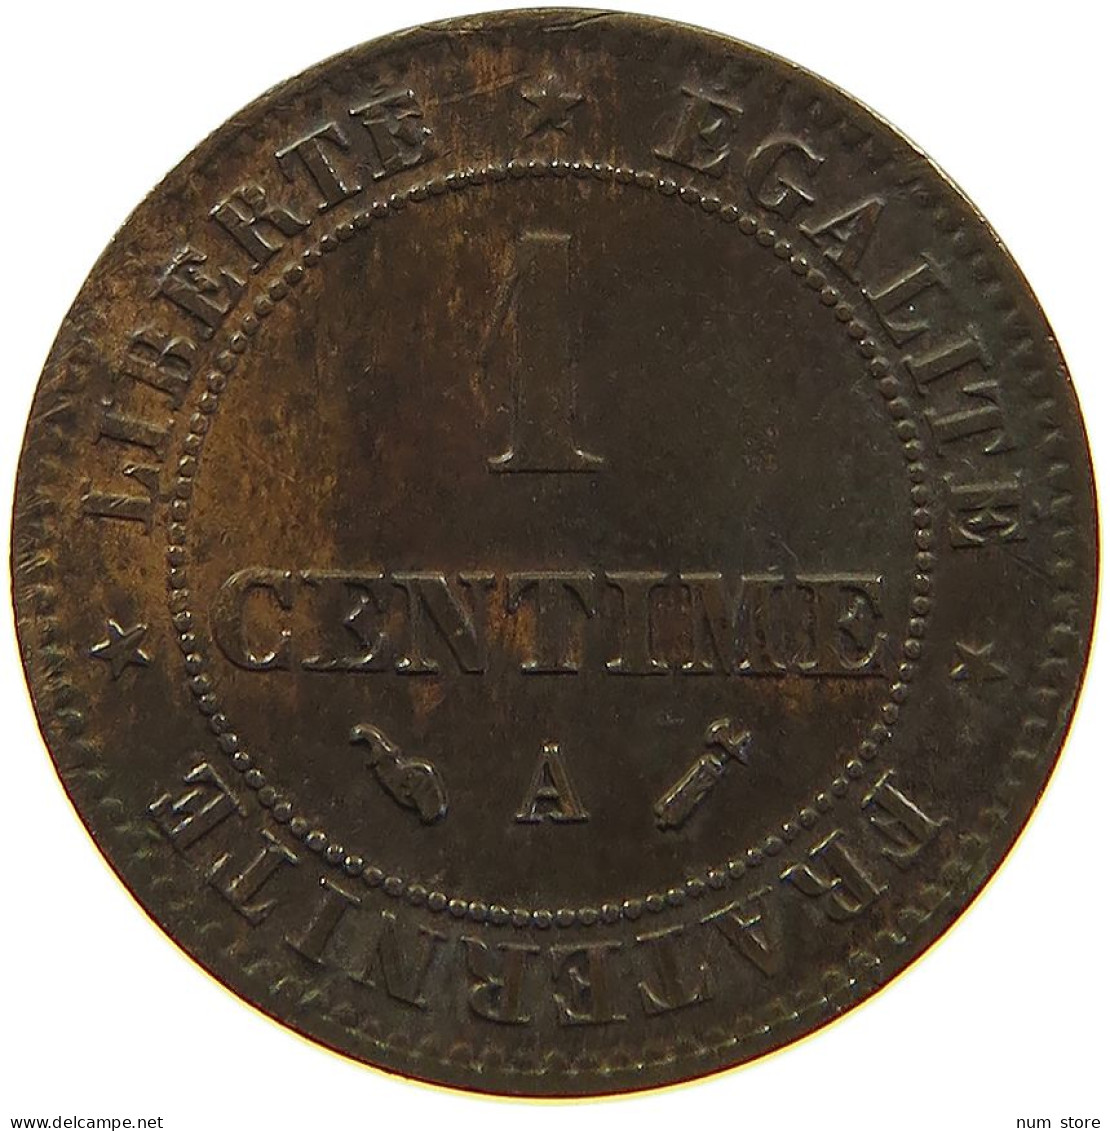 FRANCE CENTIME 1895 A  #s012 0143 - 1 Centime